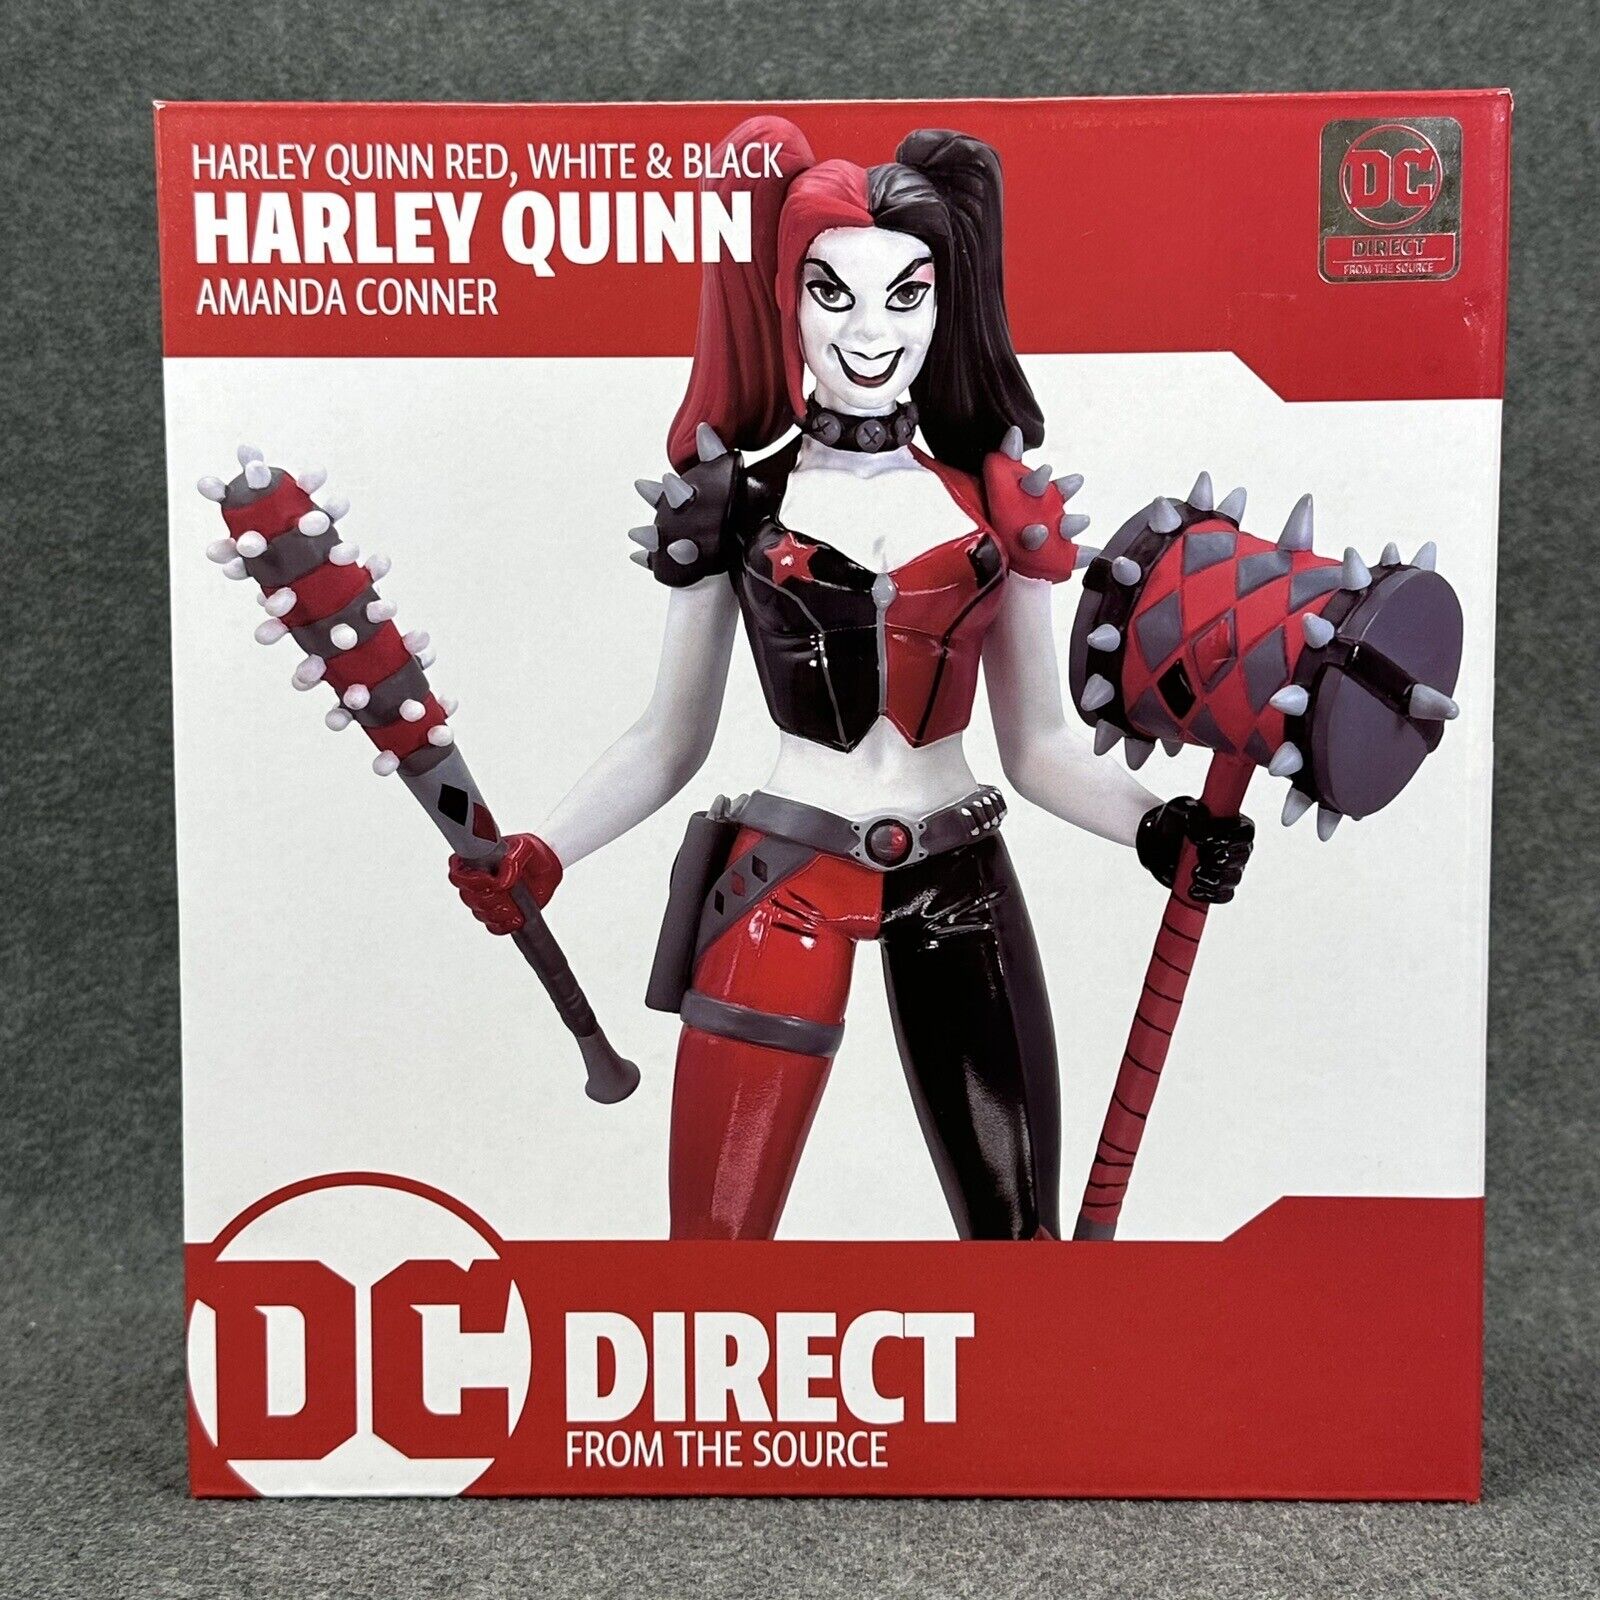 DC Direct Harley Quinn Red White & Black by J. Amanda Connor 1:10 Statue - New